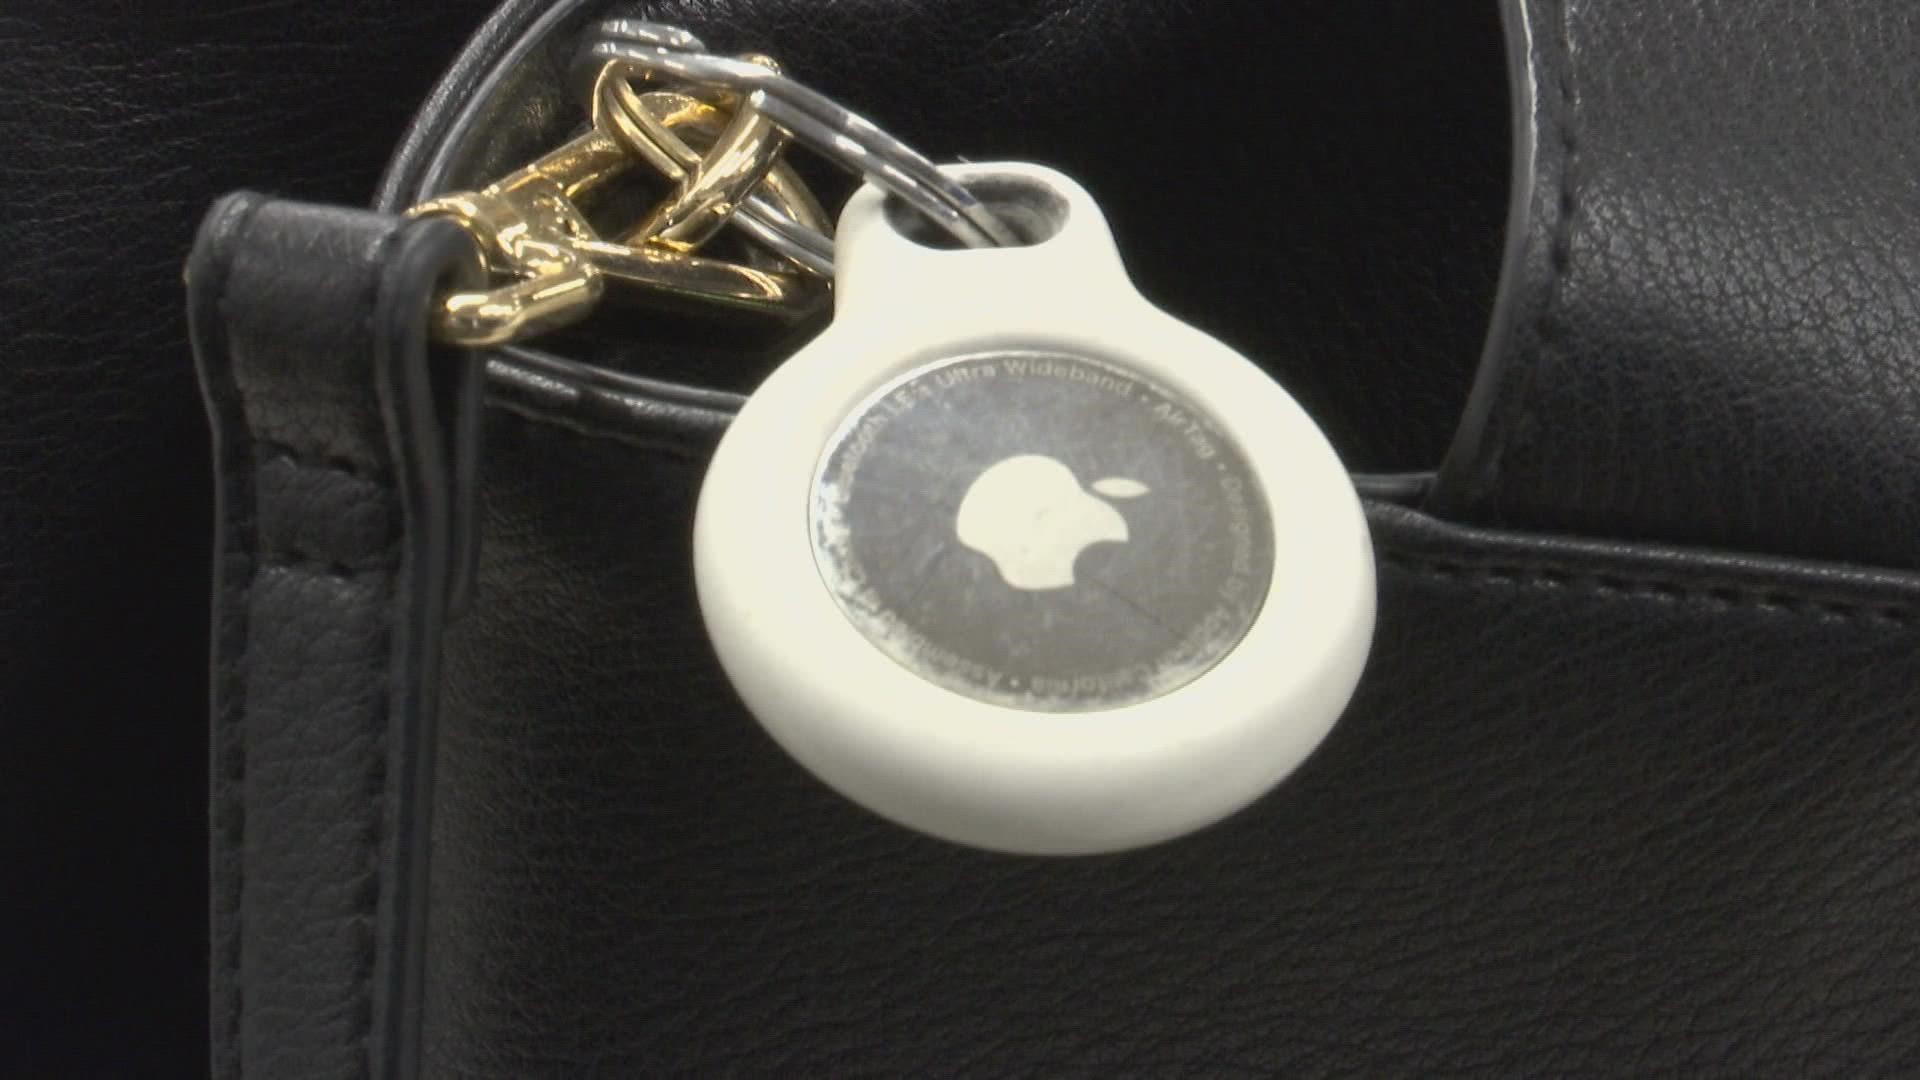 Apple is facing a class action lawsuit over its AirTag devices allegedly being used to stalk people. An Indiana murder case is cited in the lawsuit.